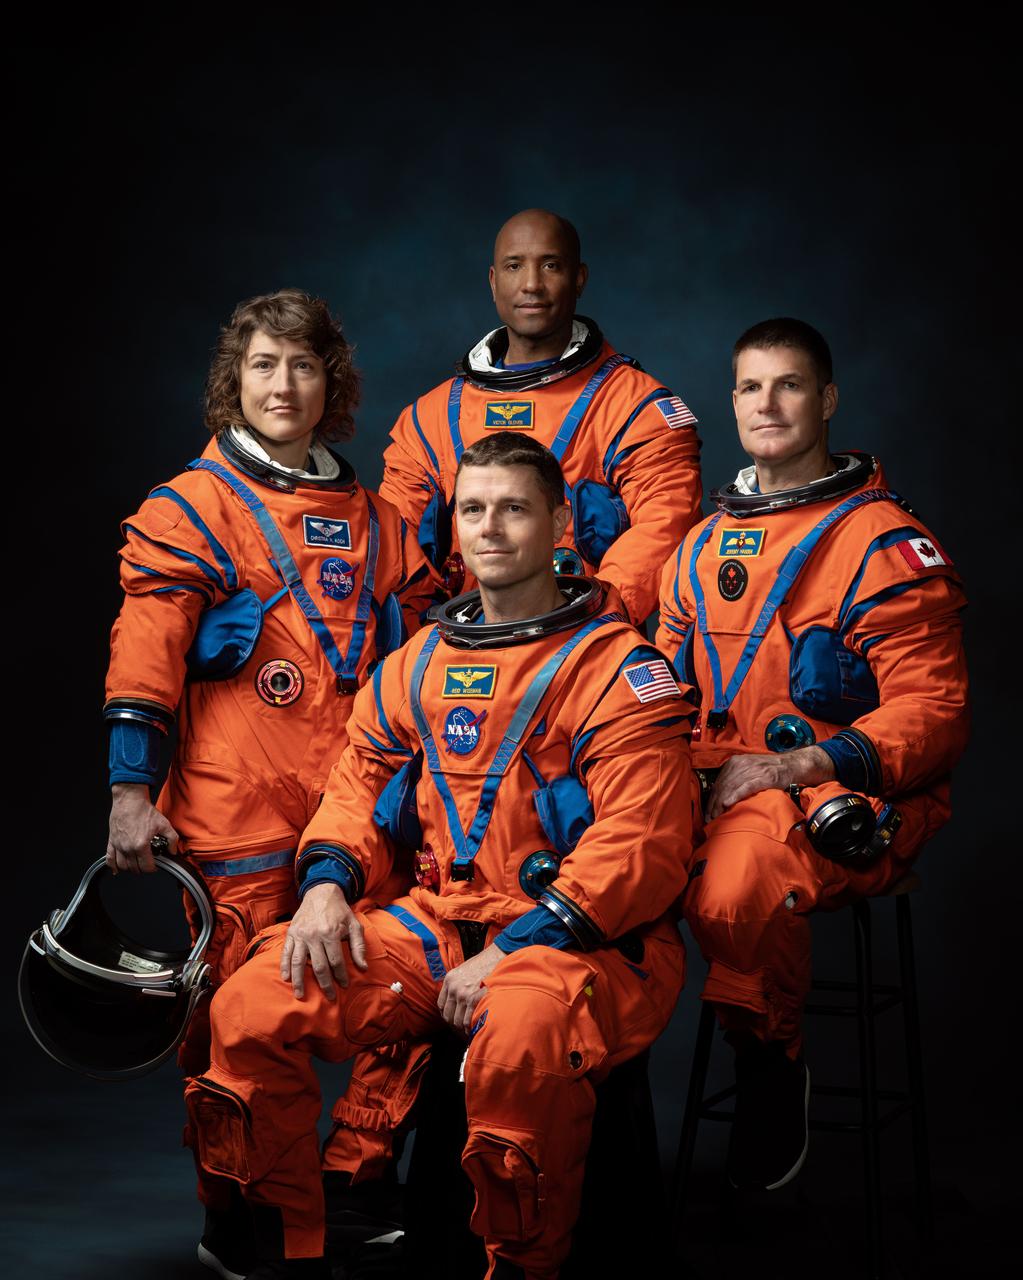 <em>Crew members of the Artemis II mission are NASA astronauts Christina Hammock Koch, Reid Wiseman and Victor Glover and Canadian Space Agency astronaut Jeremy Hansen. Credit: NASA/James Blair</em>